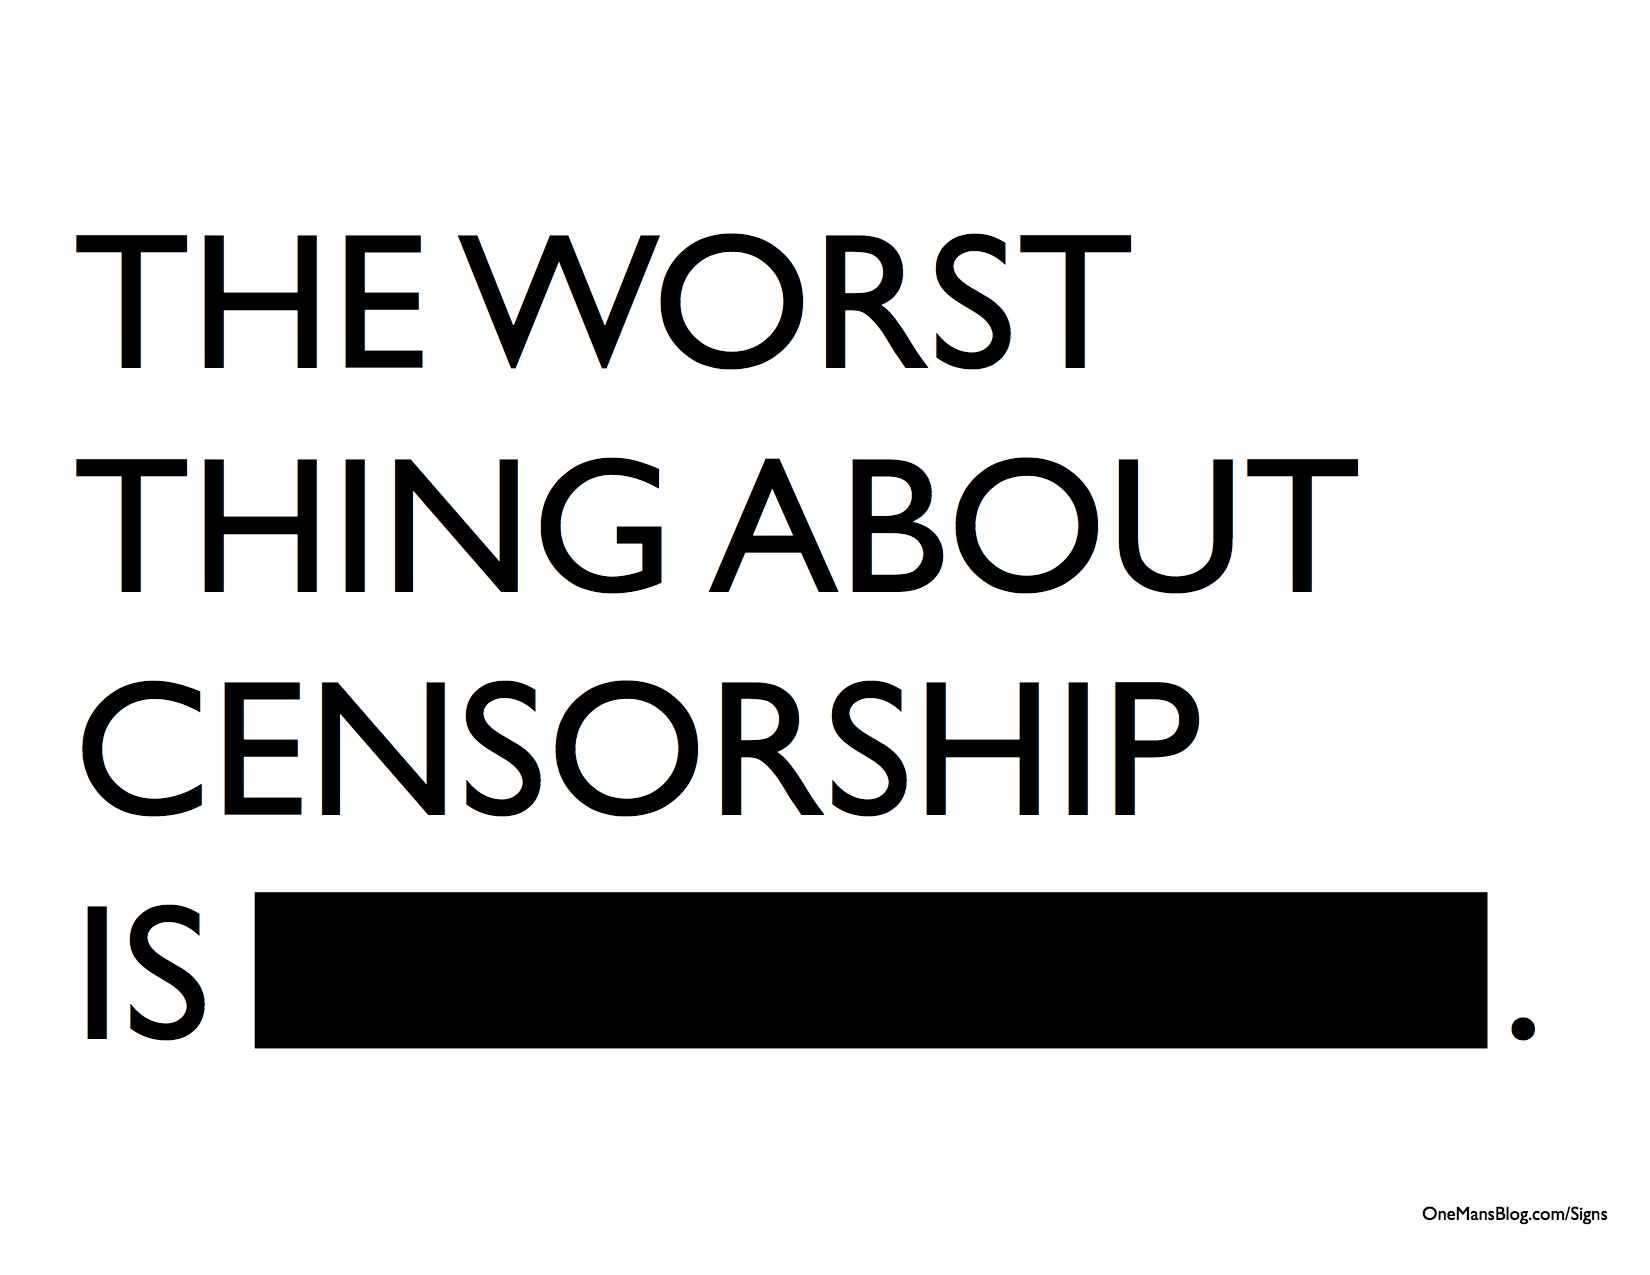 About censorship